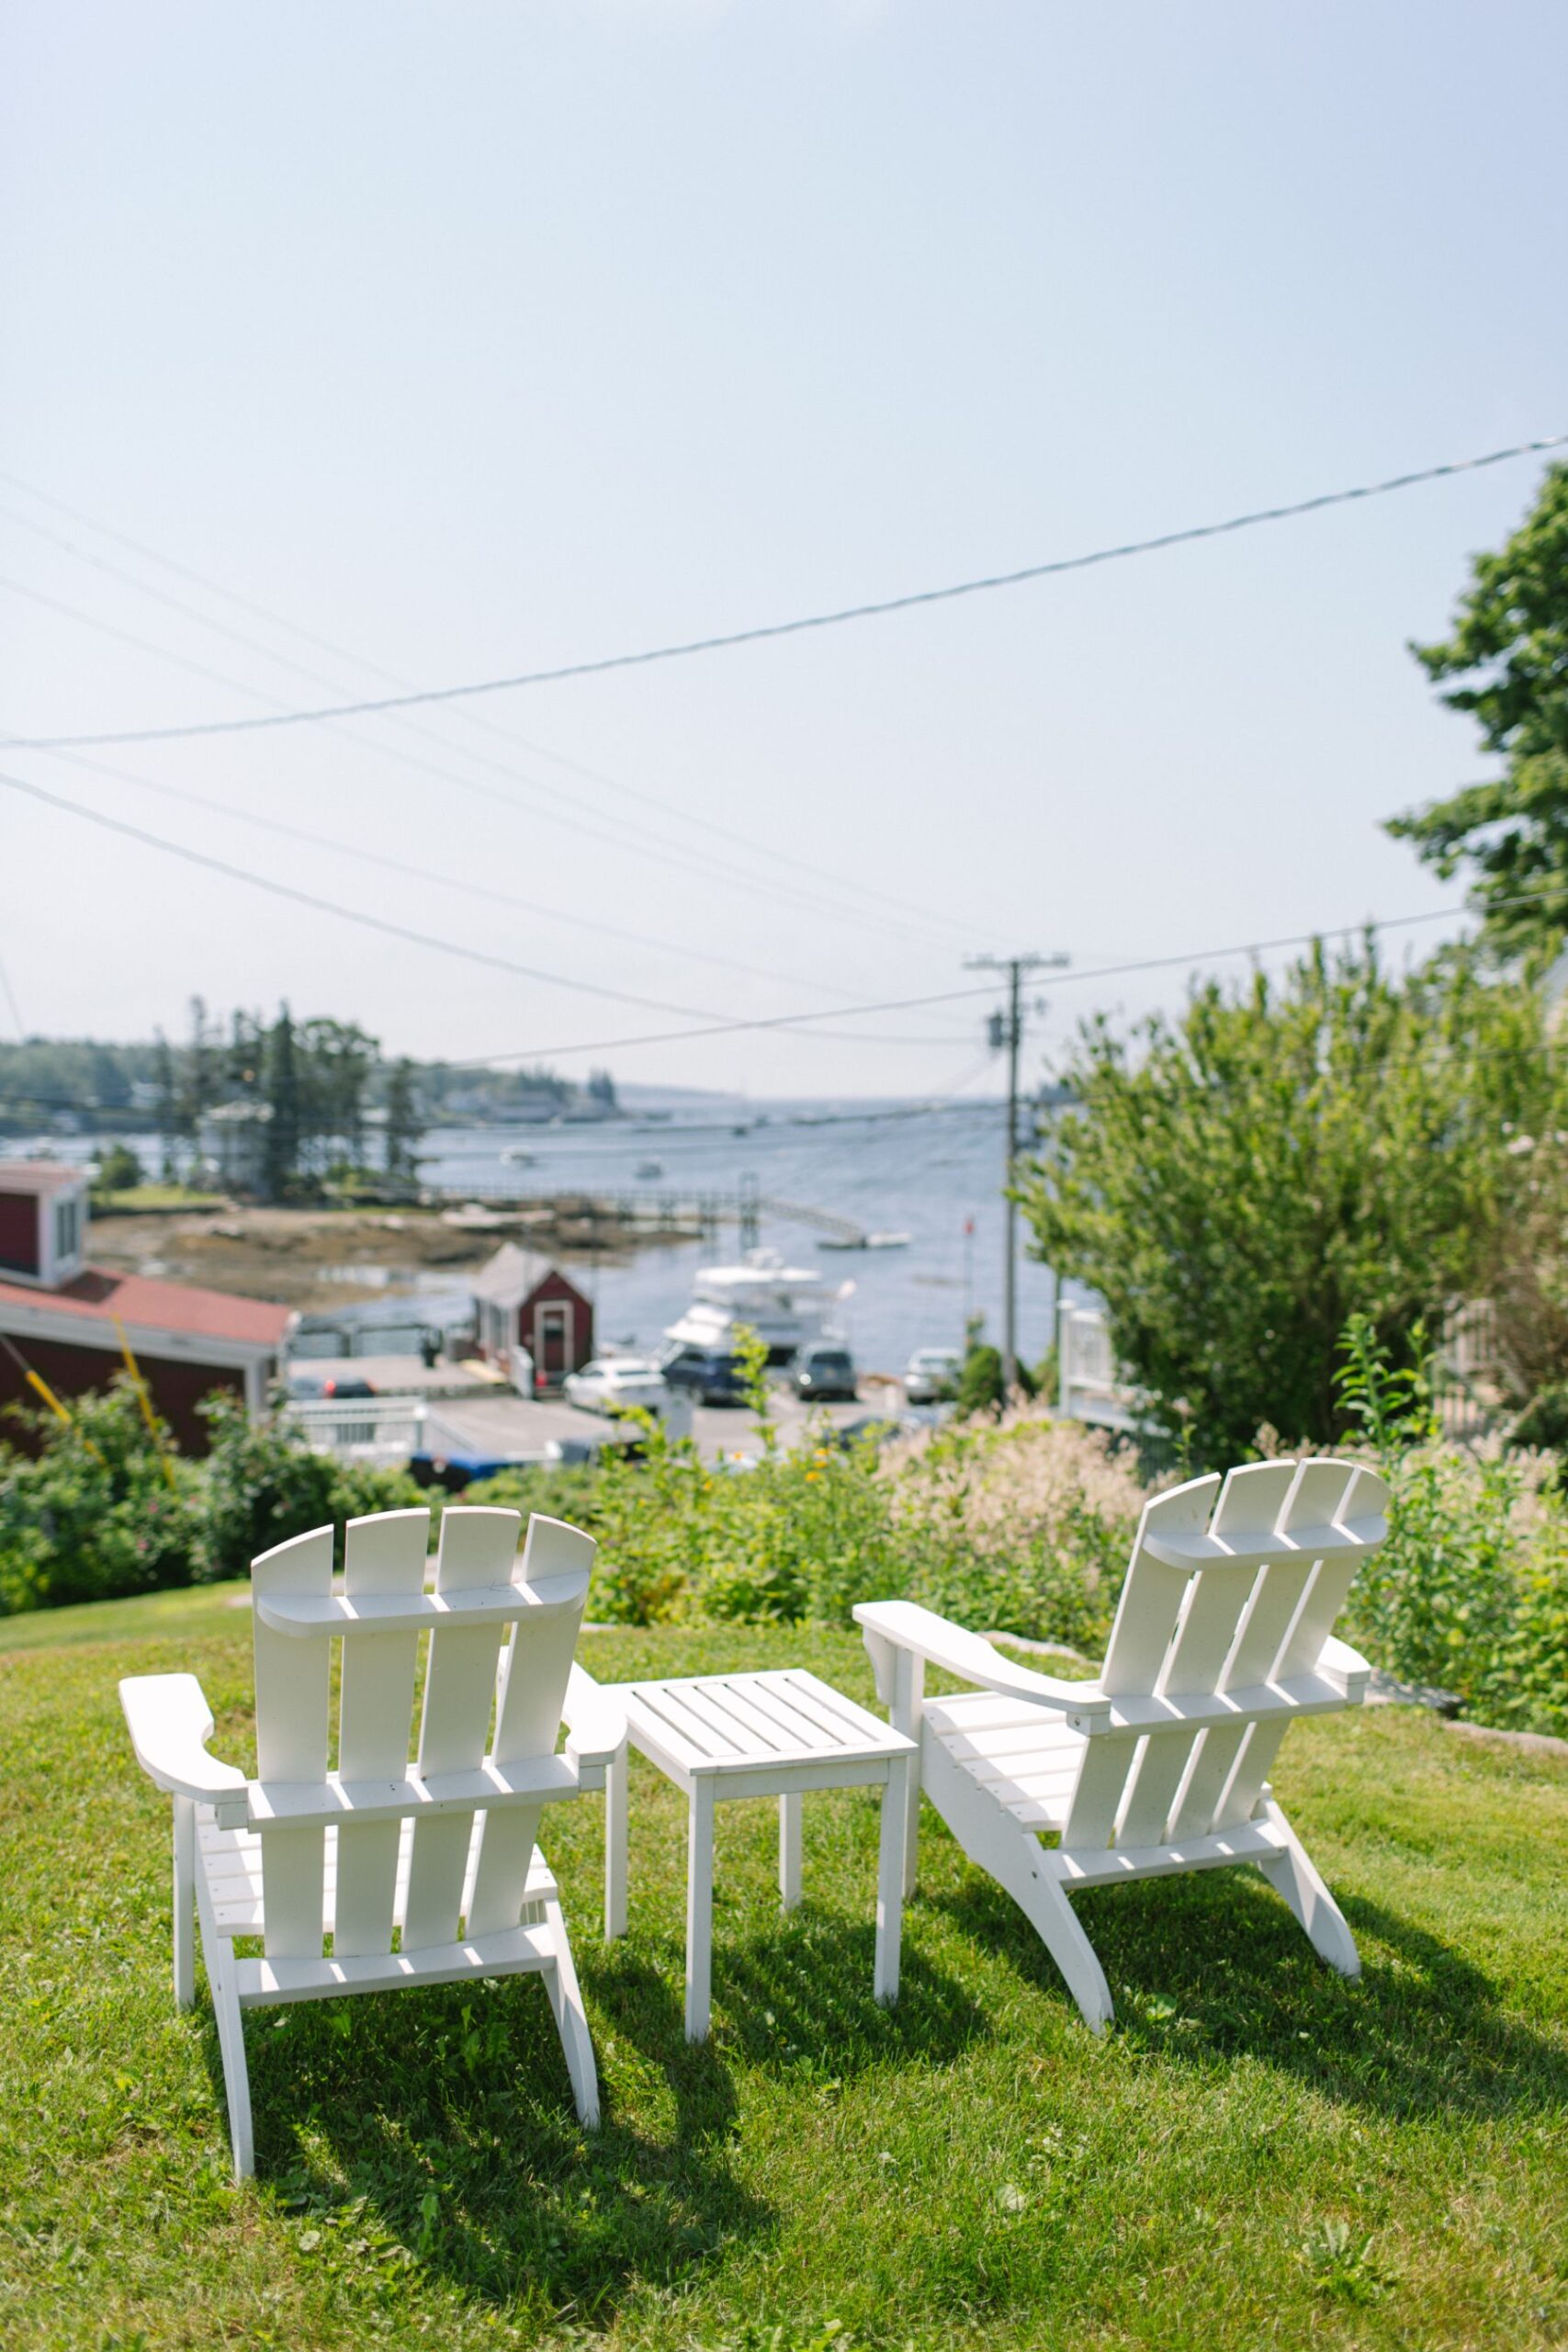 Exploring Boothbay Harbor’s Rich Historical Treasures